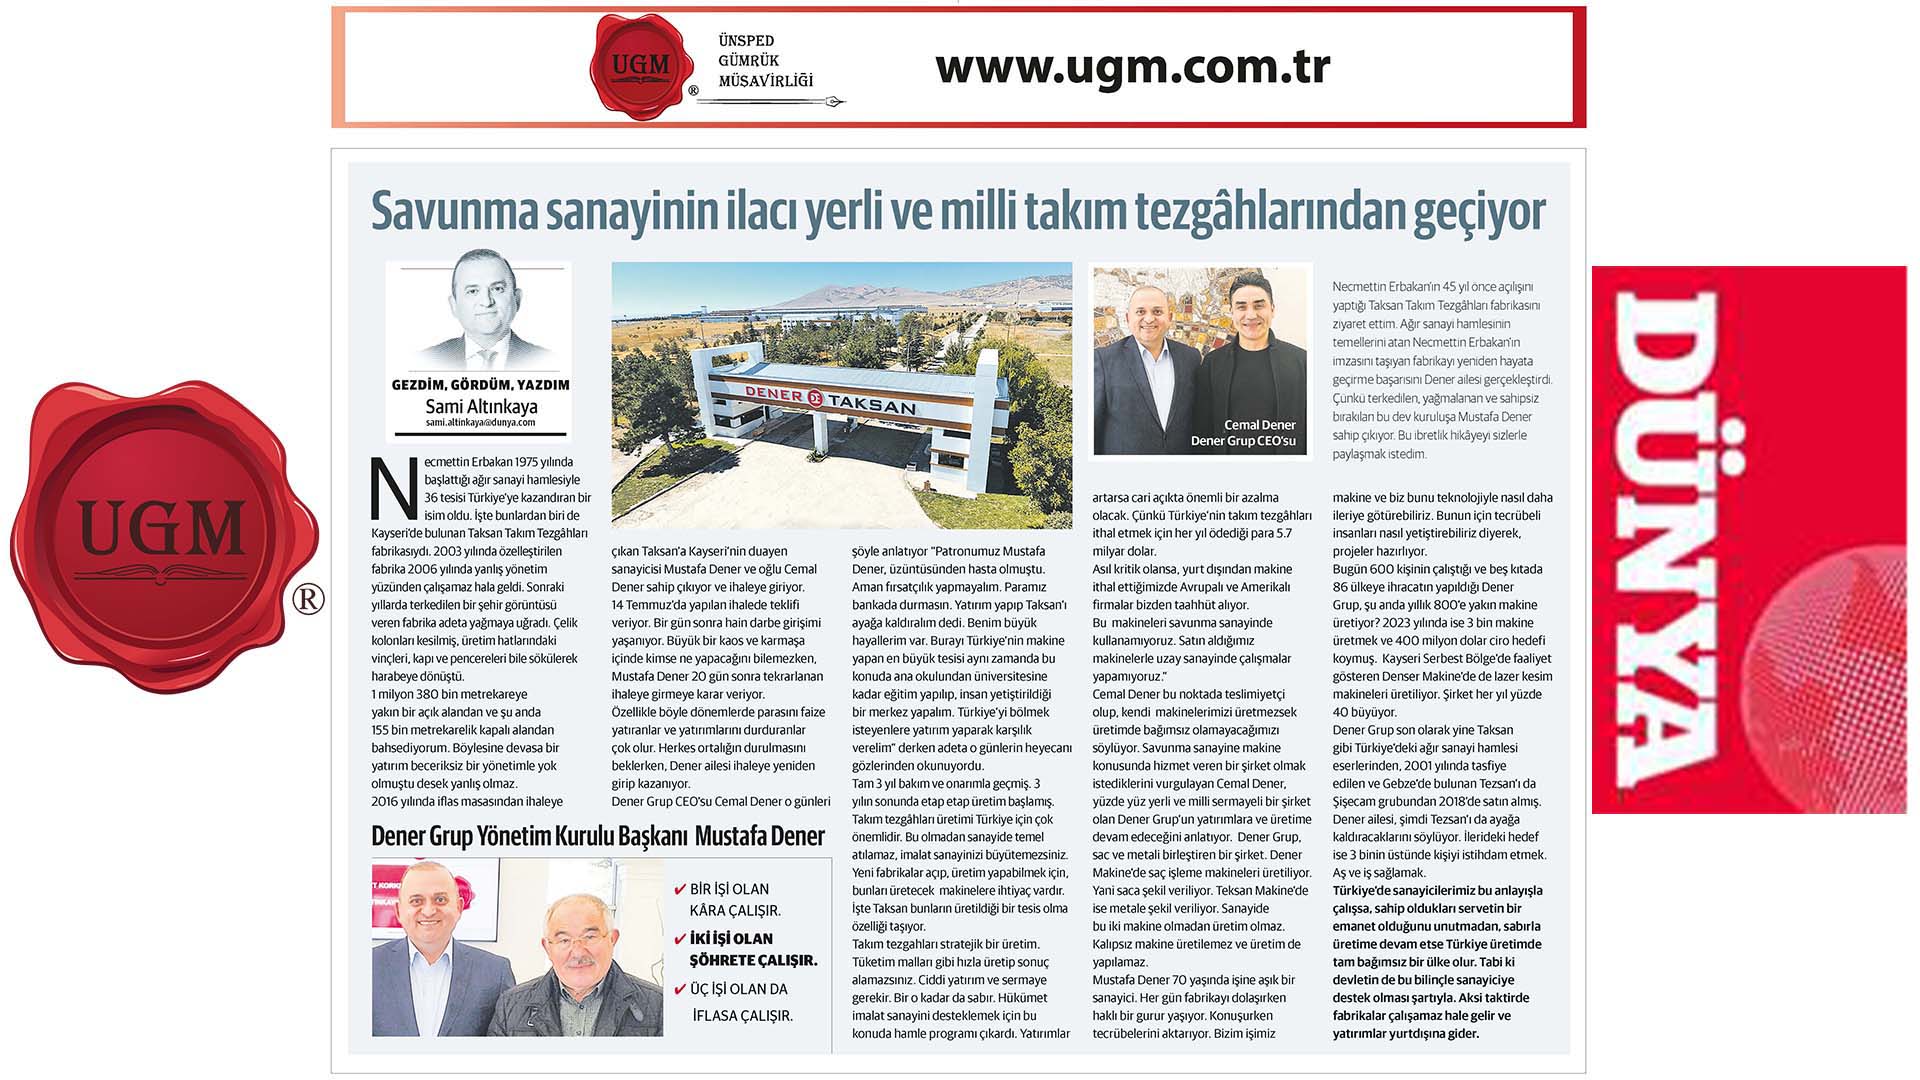 The article of UGM Corporate Communications Director Mr. Sami Altınkaya titled "Defense industry medicine passes through domestic and national team benches" is published in the Dünya newspaper on 09.03.2020